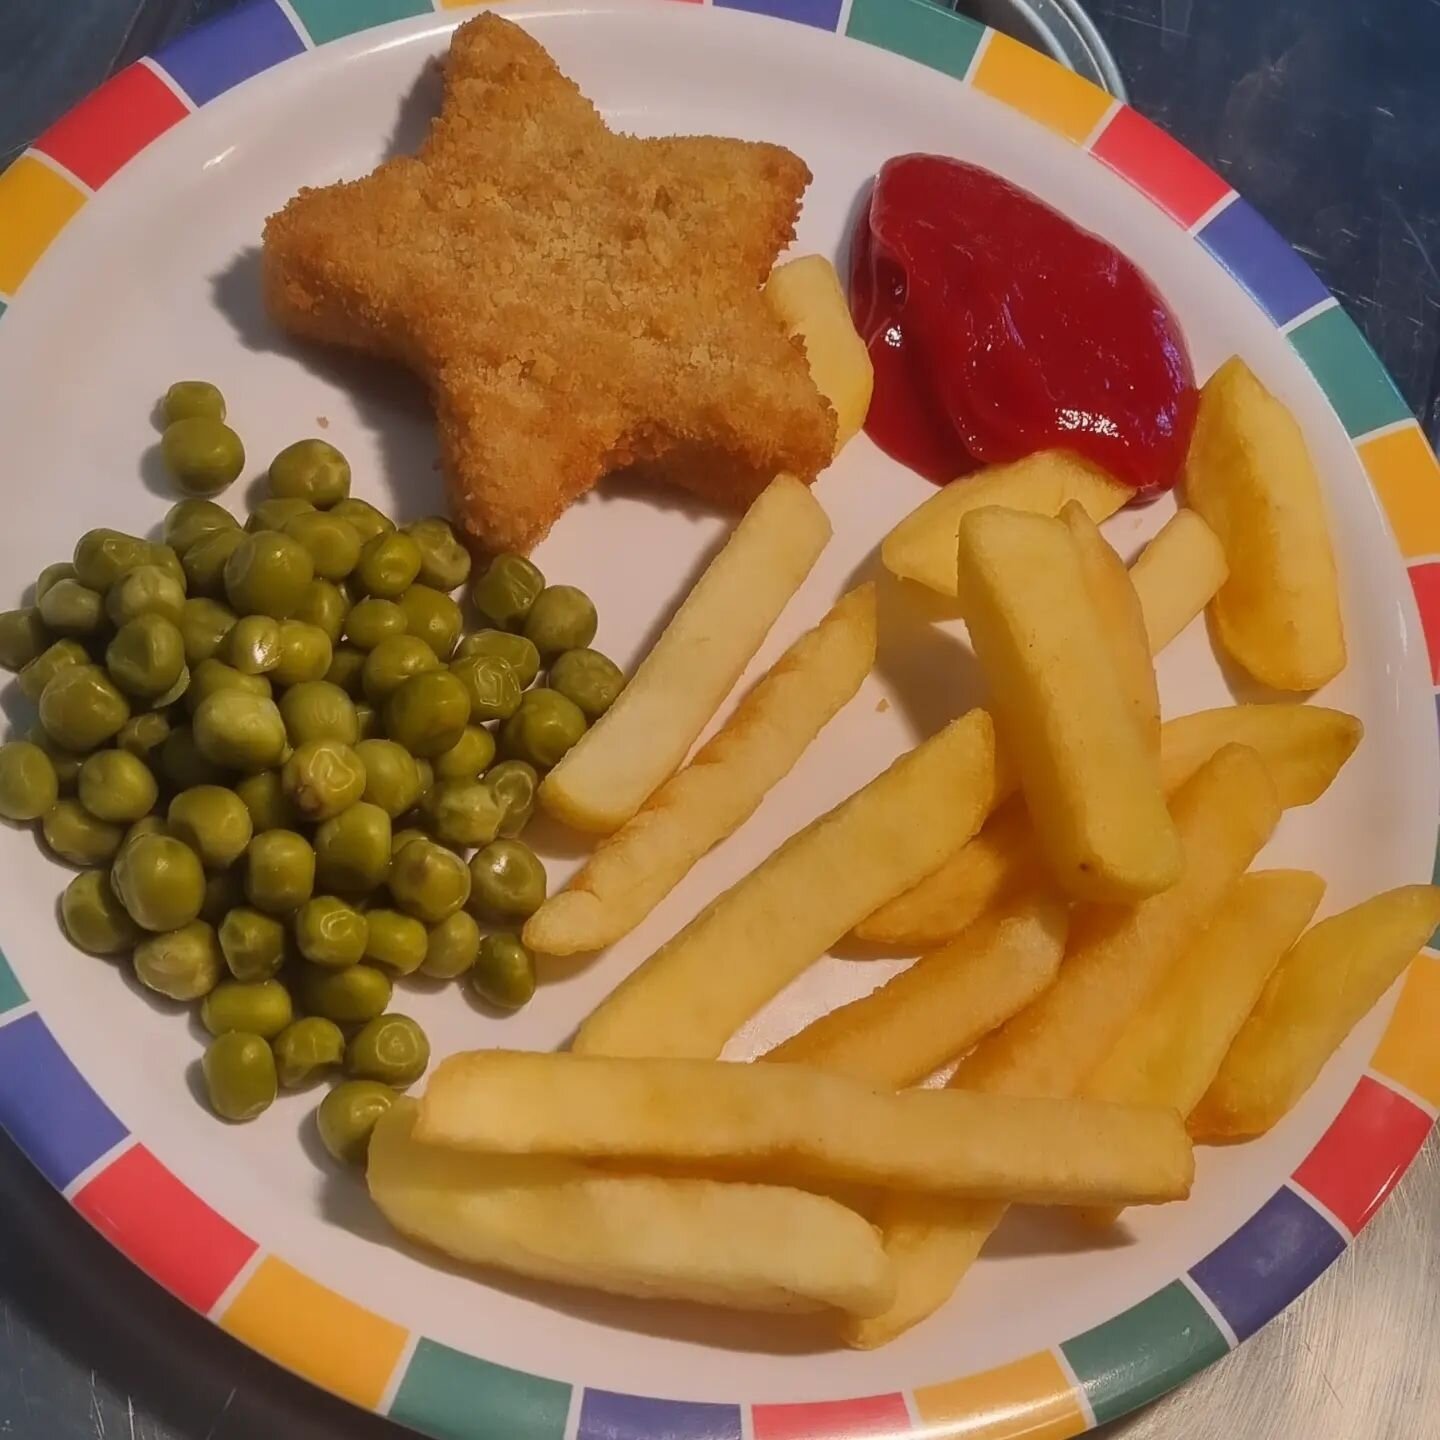 Lucky children at St Michael's- look at this tasty dinner on offer today #schooldinners 
Check out the full menu http://www.smaaawirral.com/school-meals